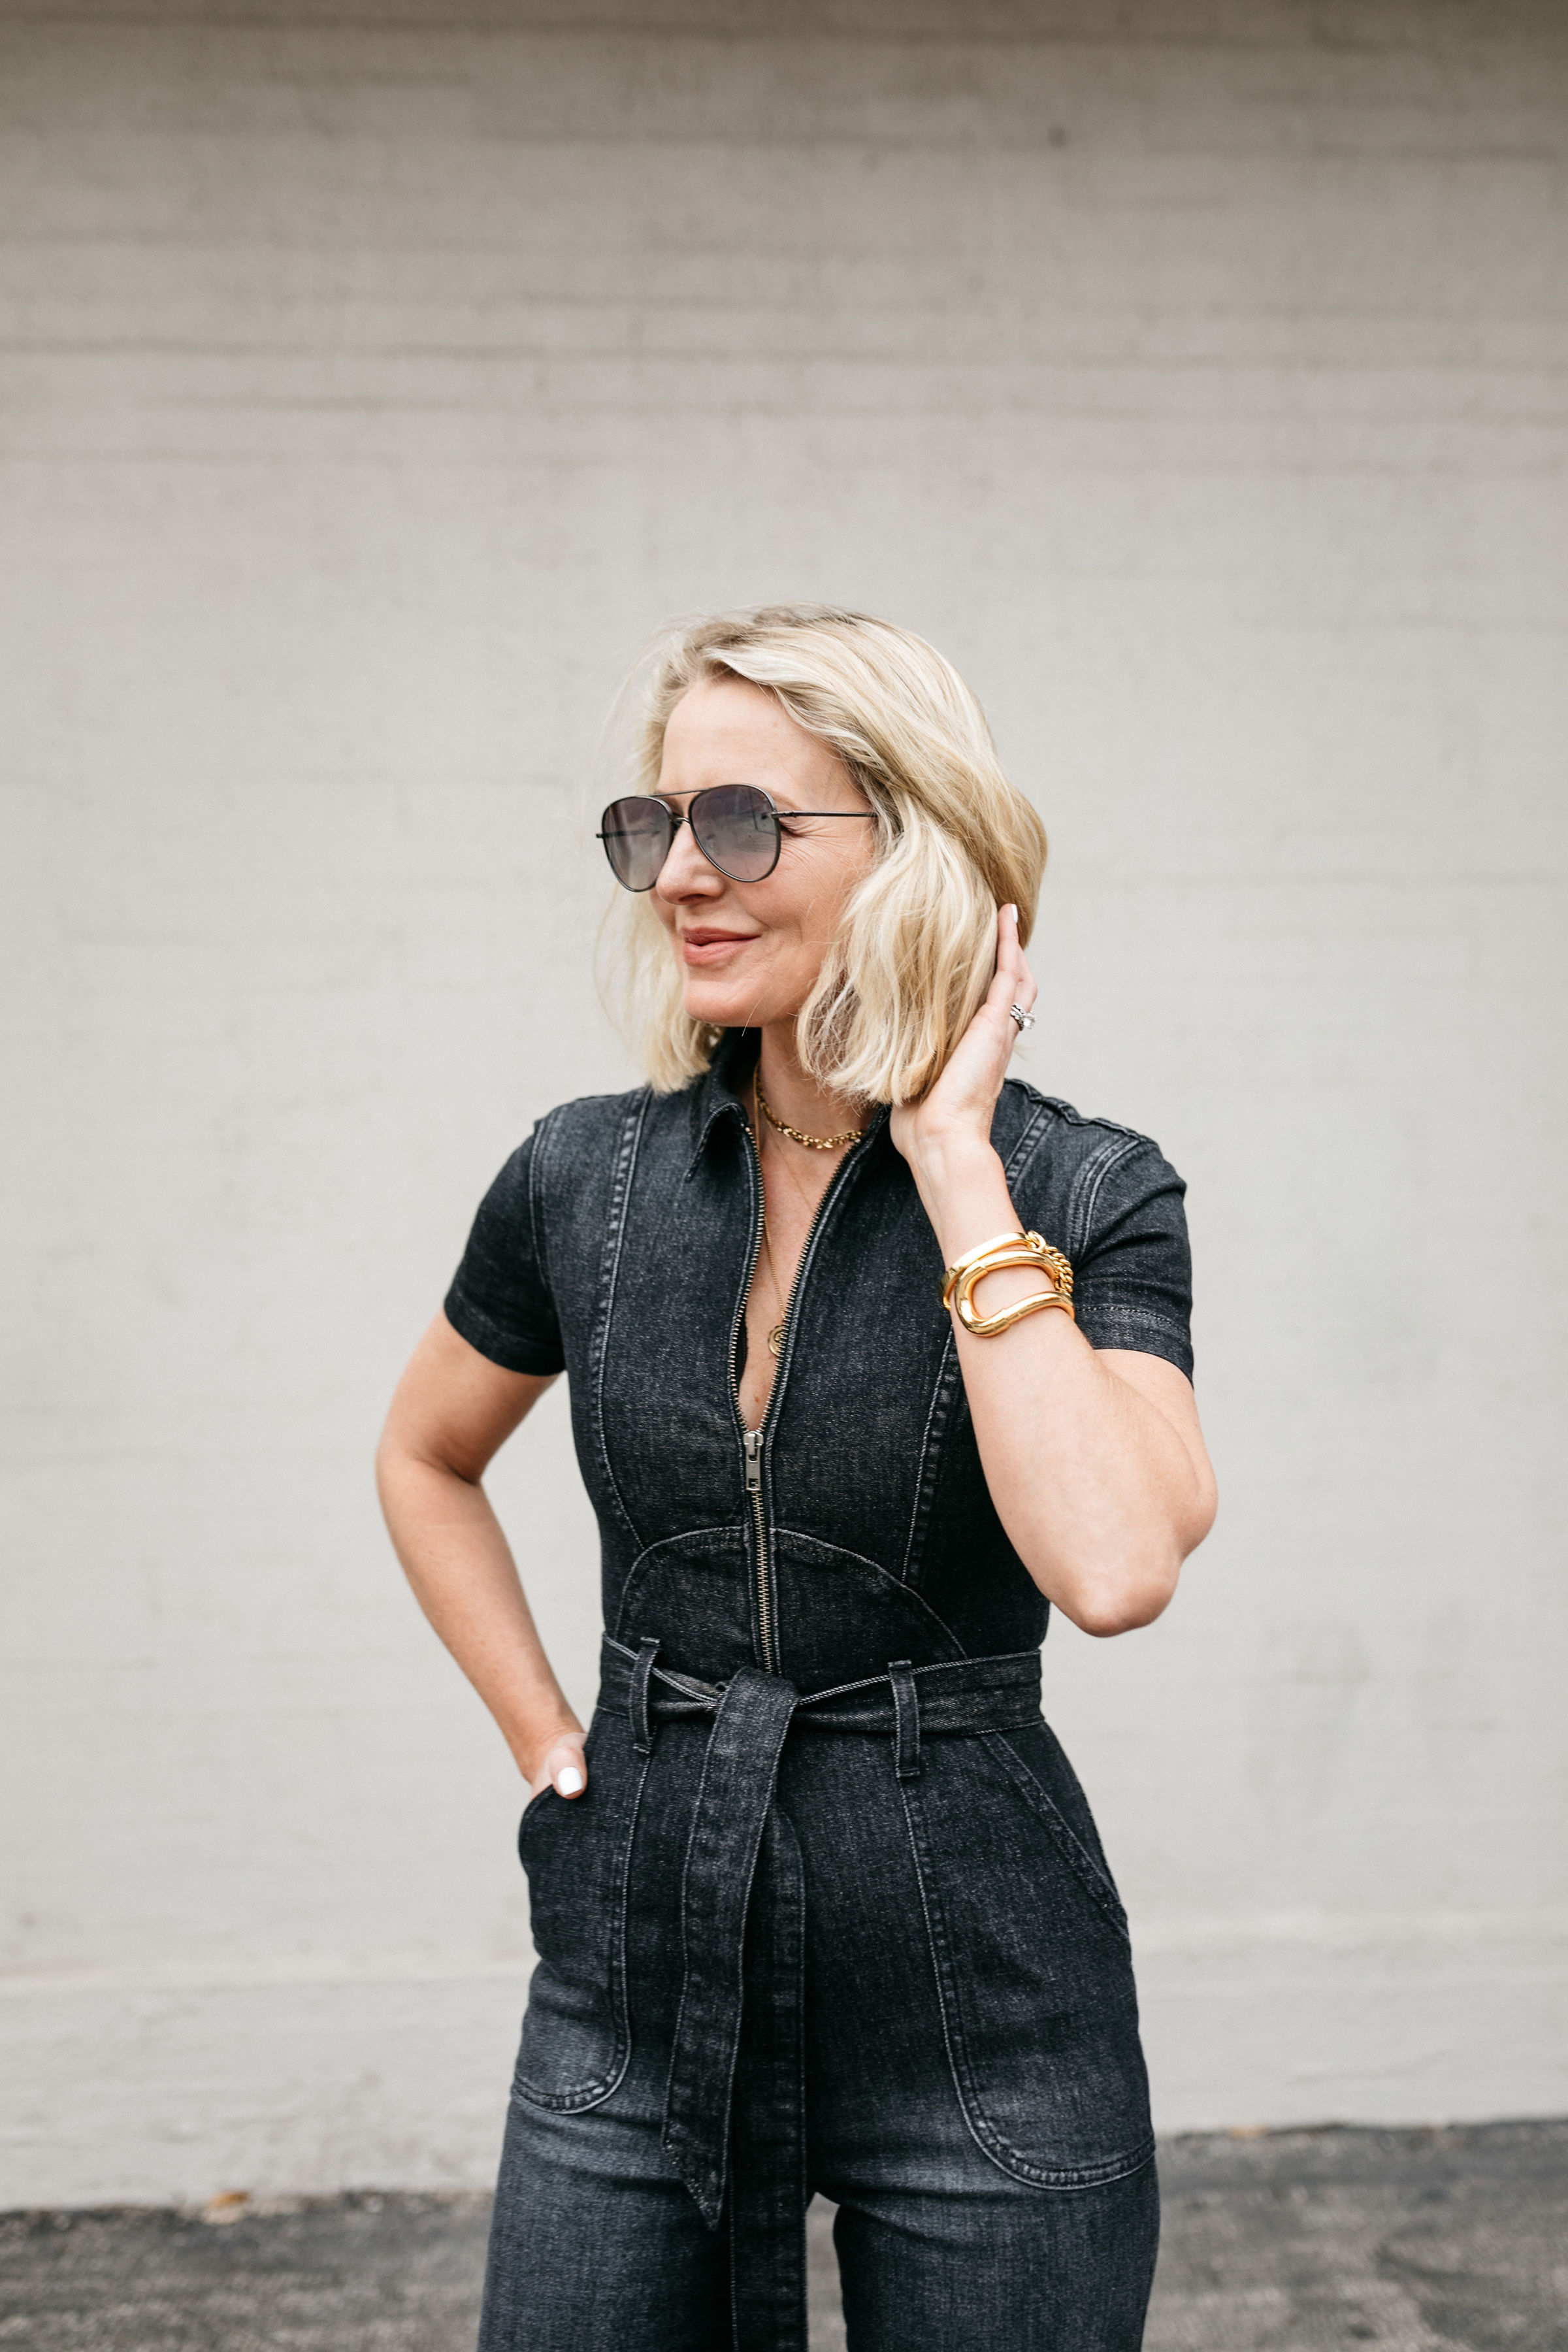 Reward Style Conference 2019, Fashion Blogger Erin Busbee of BusbeeStyle.com wearing an Alice + Olivia black denim jumpsuit in Dallas, Texas